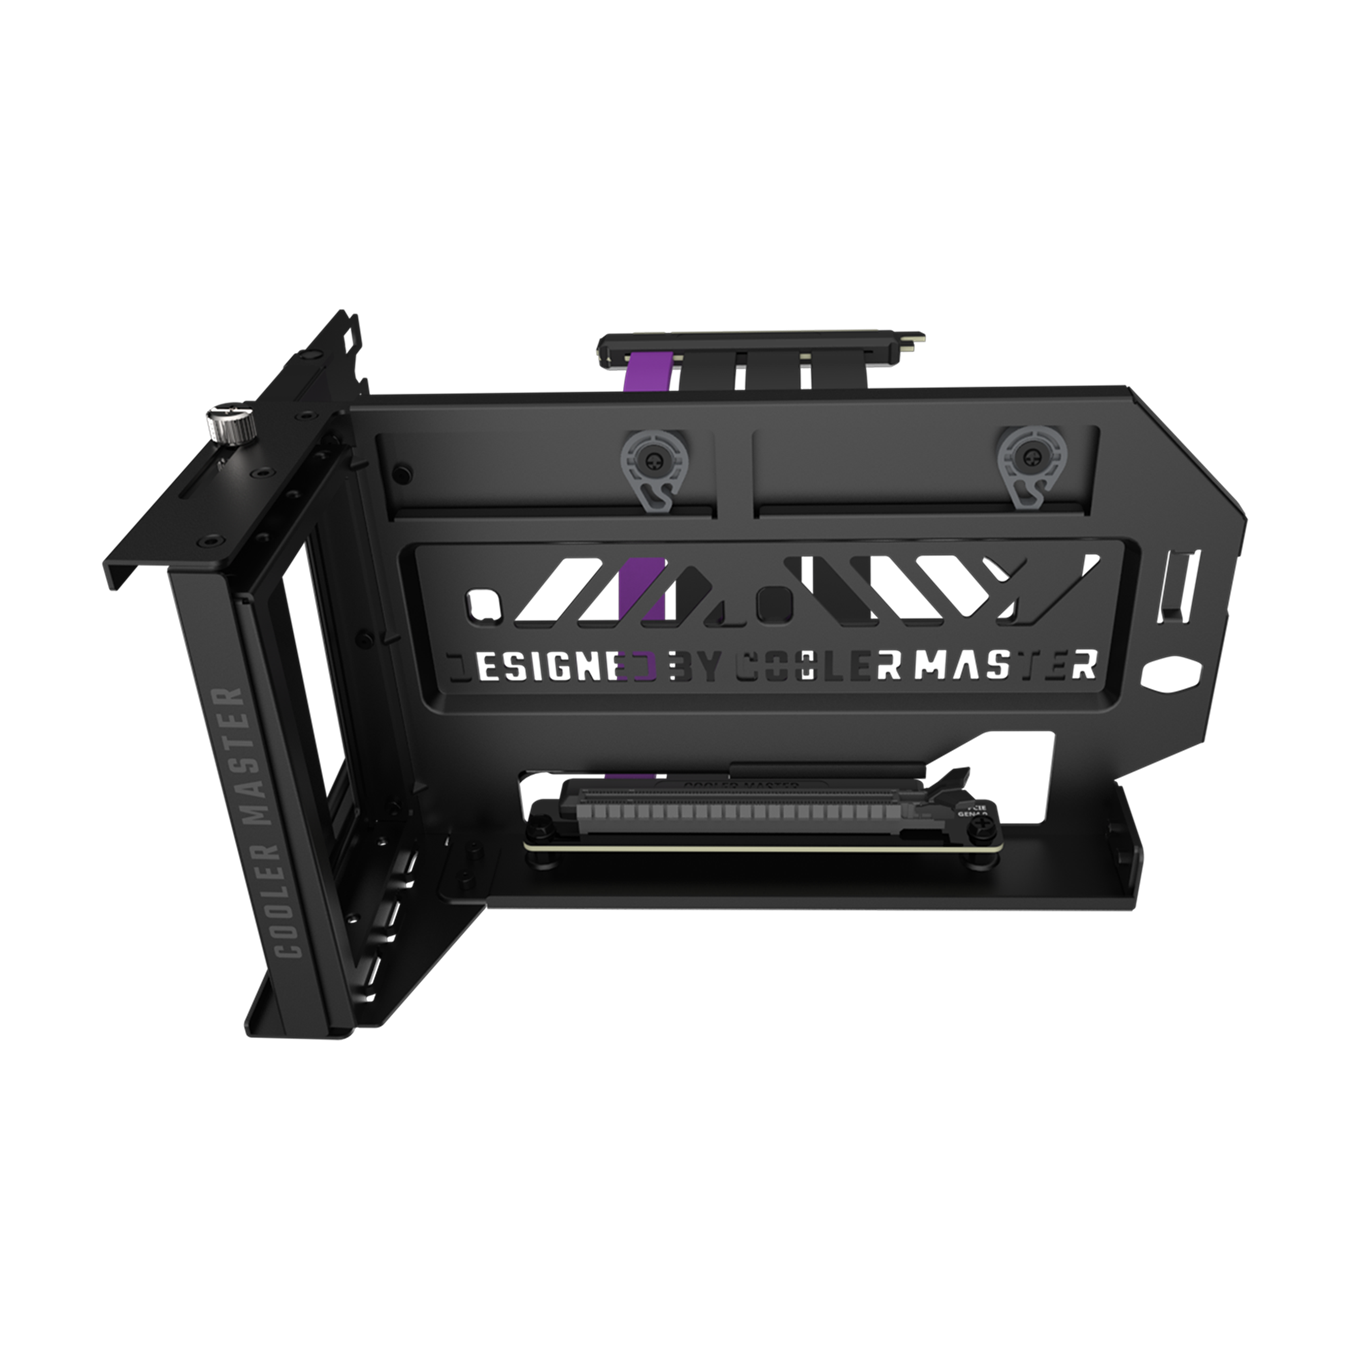 Vertical Graphics Card Holder Kit V3 - Supporting cases ranging in size from Micro-ATX to ATX, this remastered design allows unprecedented compatibility with various builds and setups.